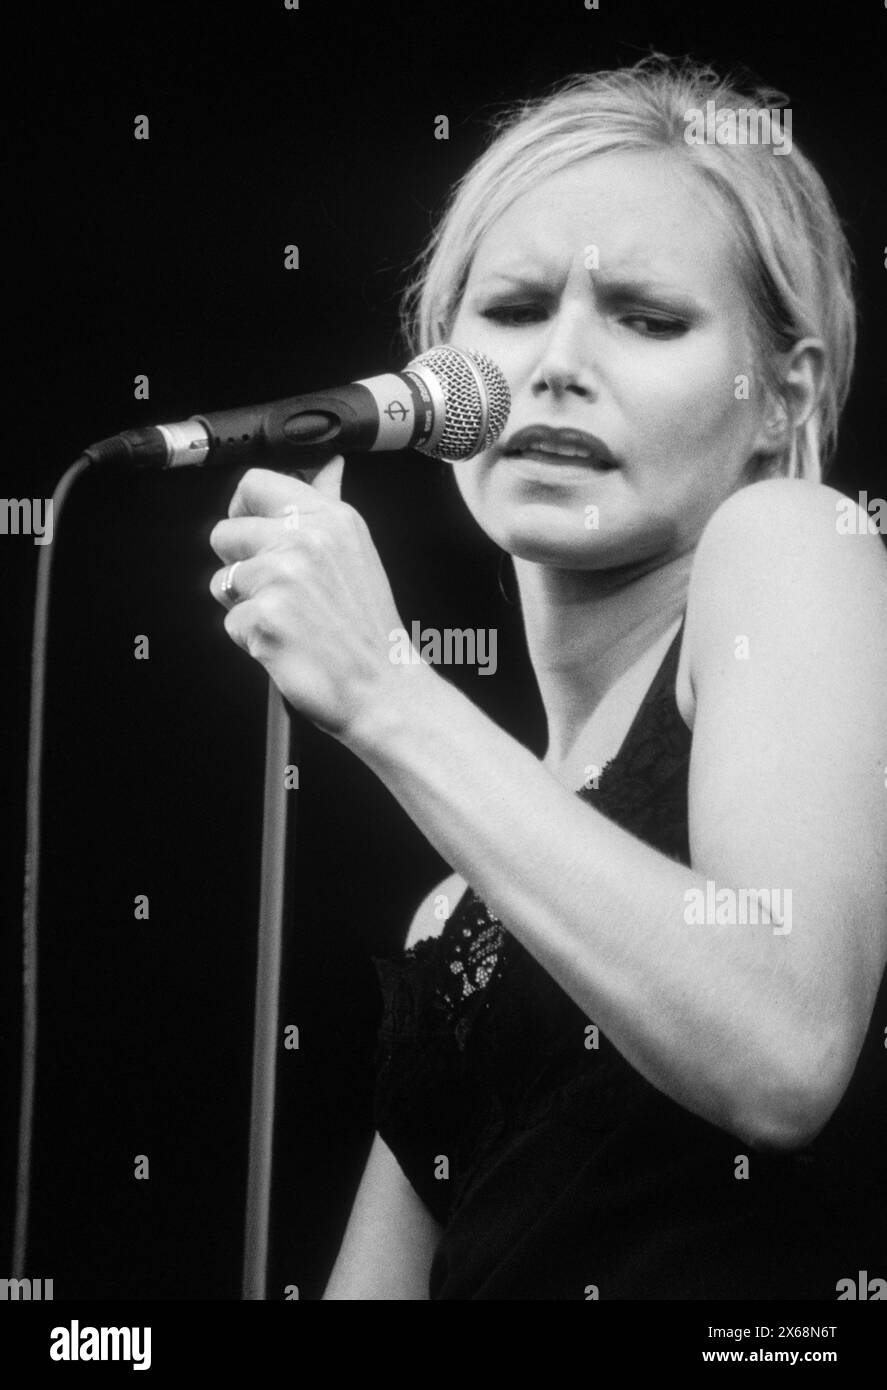 NINA PERSSON, THE CARDIGANS, READING FESTIVAL 1997: Nina Persson of Swedish band The Cardigans playing at Reading Festival, Reading, UK on 23 August 1997. Photo: Rob Watkins.   INFO: The Cardigans, a Swedish band formed in the early '90s, gained international fame with hits like 'Lovefool.' Their eclectic sound merges pop, rock, and indie elements, marked by Nina Persson's distinctive vocals and a penchant for catchy melodies. Stock Photo